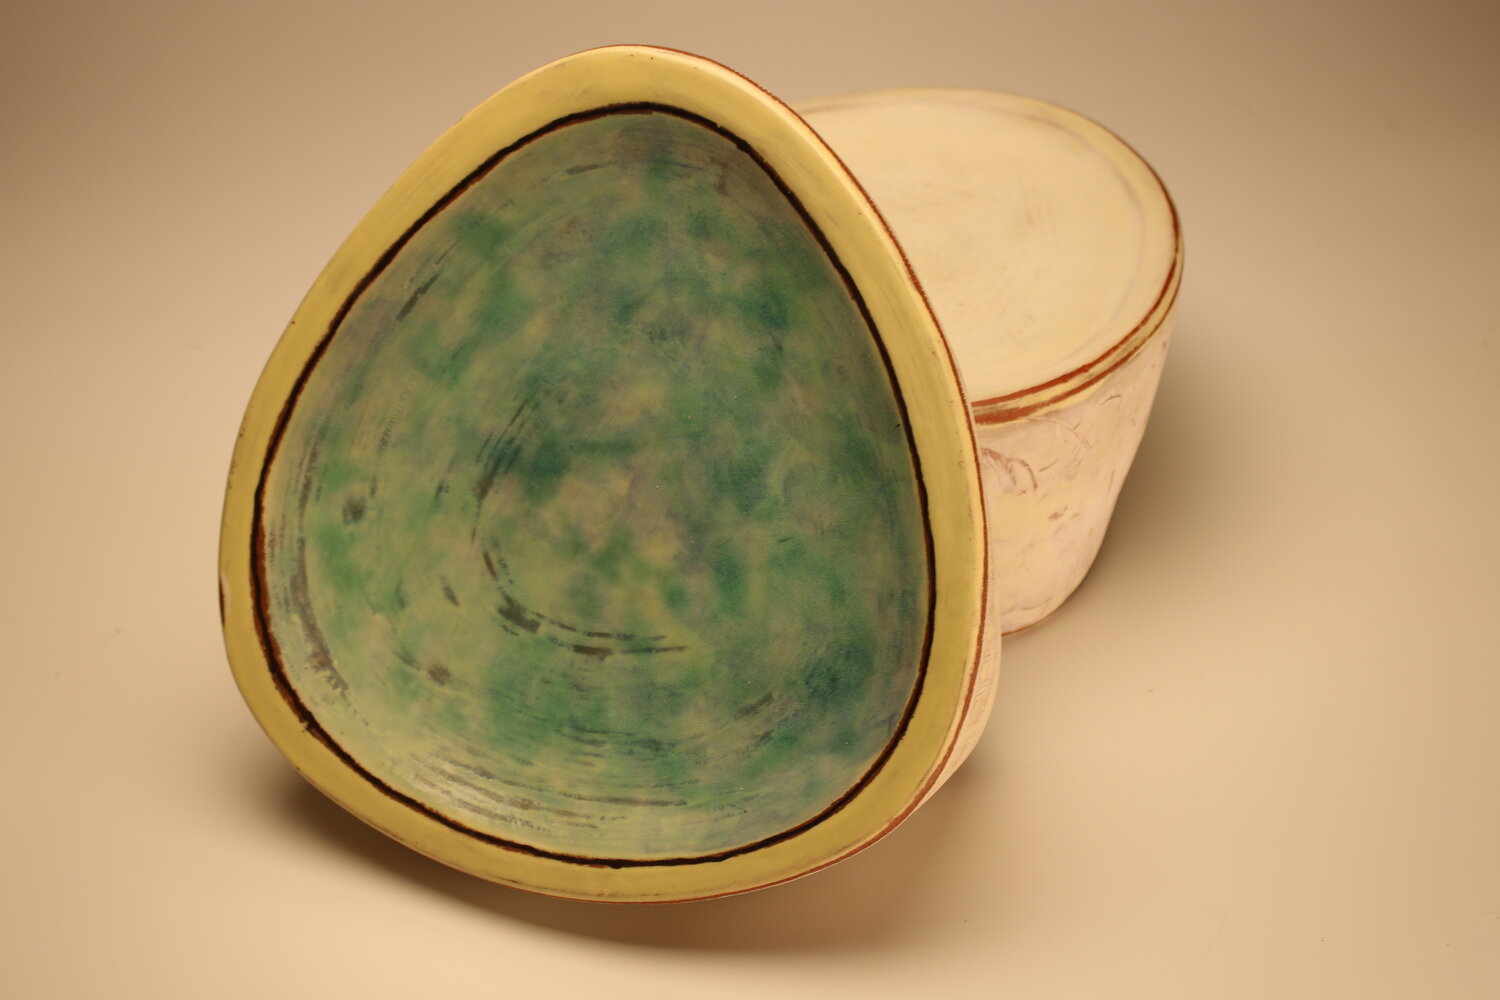 A pair of triangle shaped dishes; one with a blue green interior is propped up, image courtesy of the artist